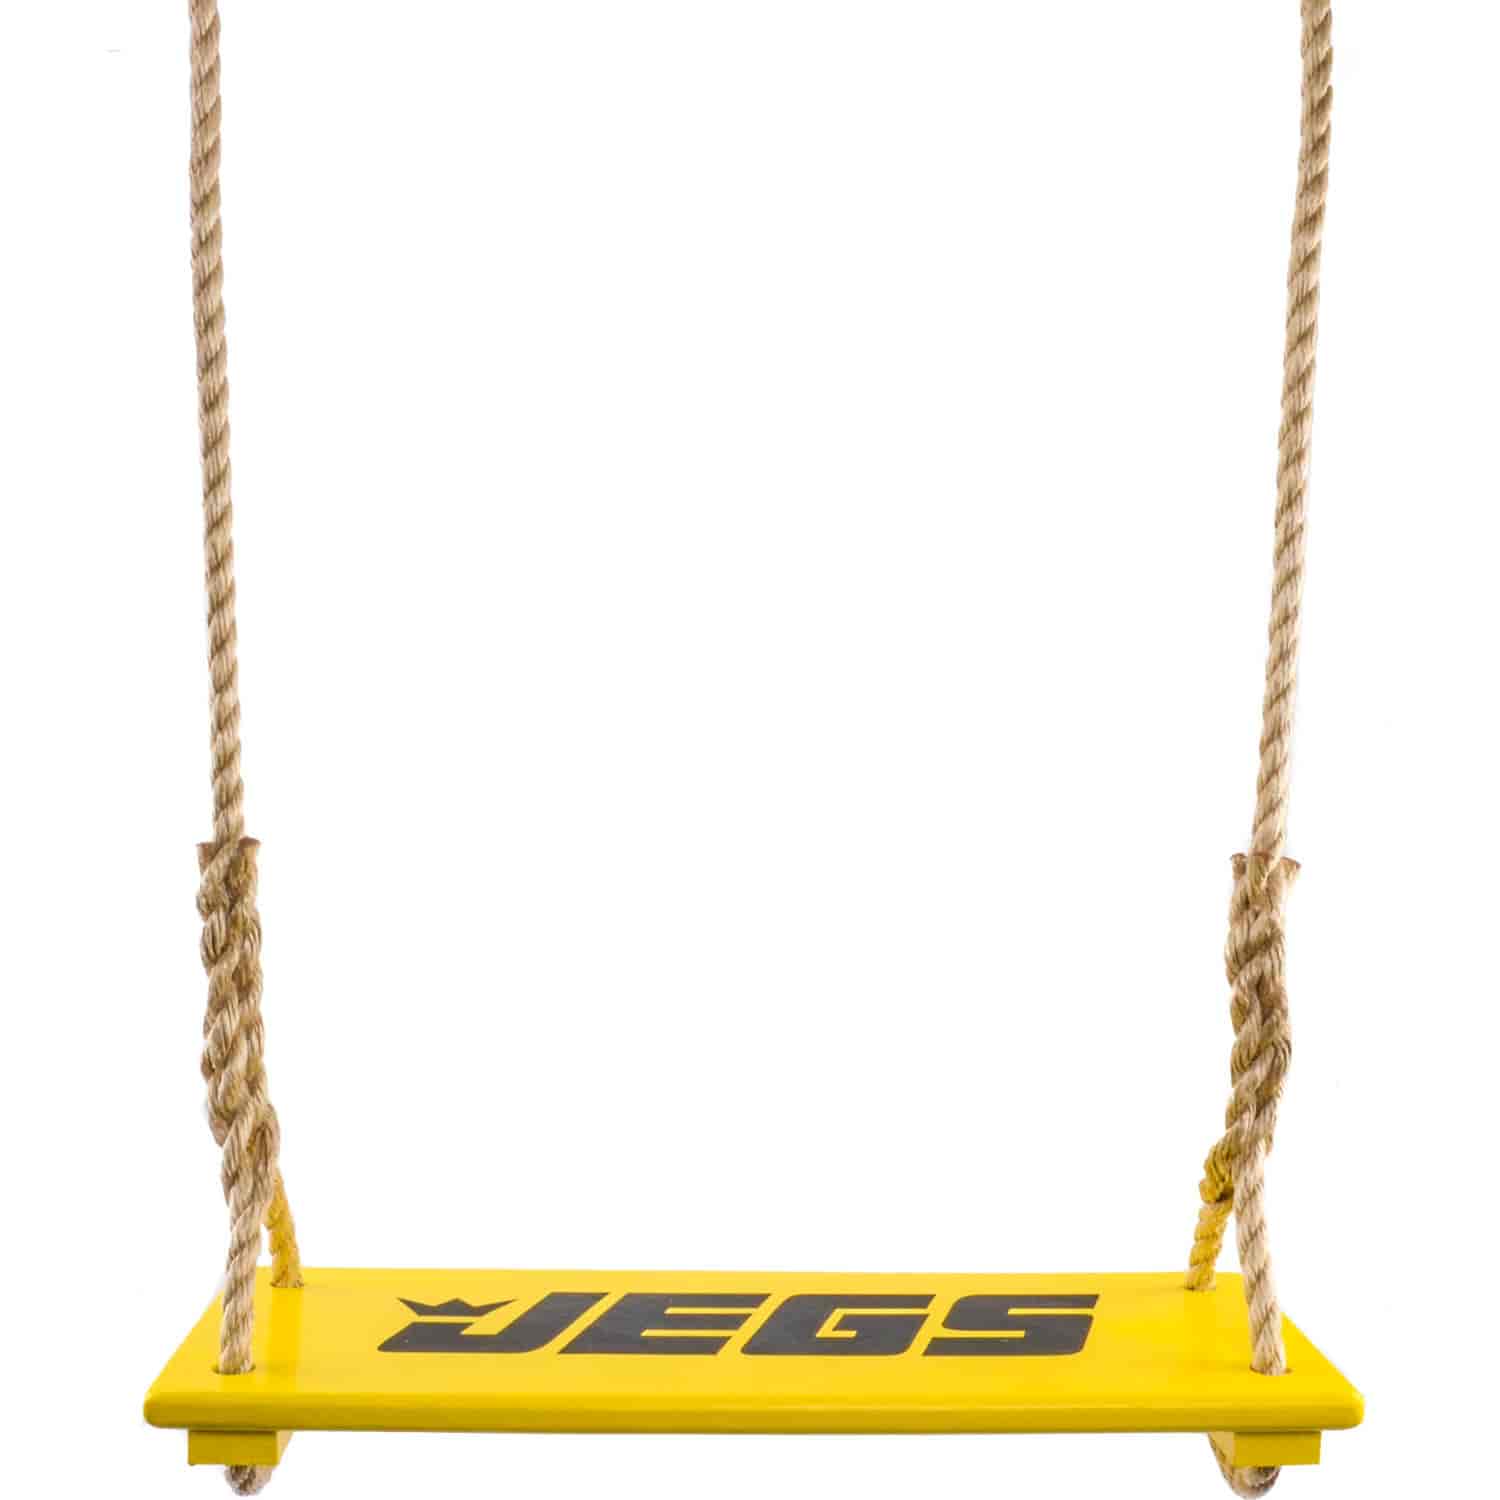 Wooden Swing Adult Size